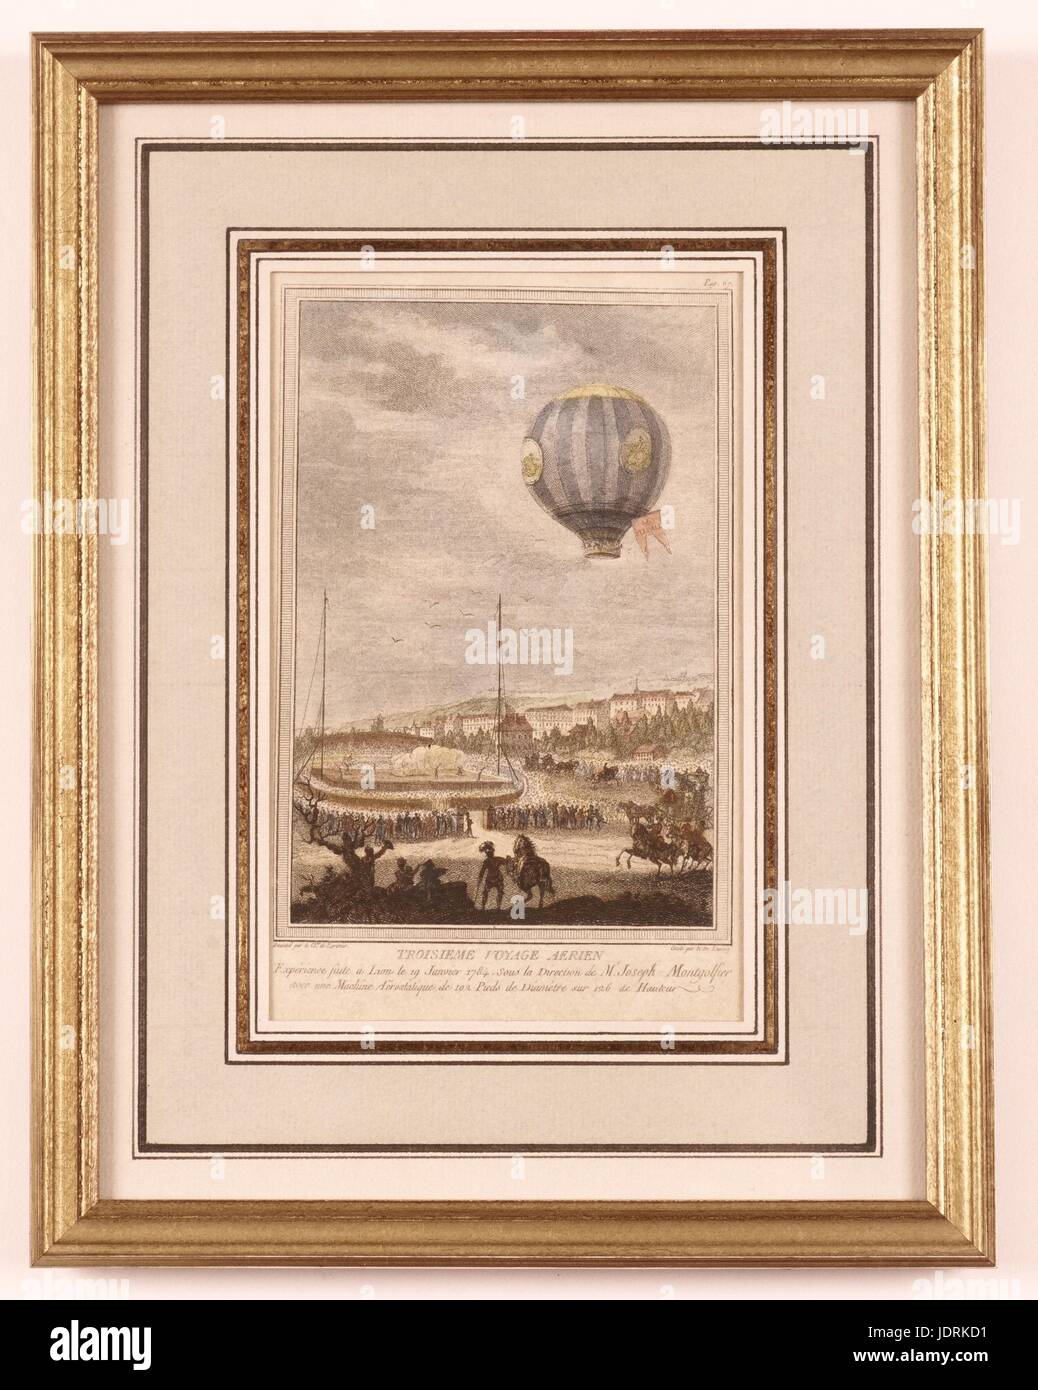 Le Chevalier de Lorimier, draftsman and Nicolas de Launay, etcher  Third human balloon flight on board the Flesselle in Lyon on 19th January 1784  Coloured etching with frame (28.5 x 22 cm)  Muller-Quênot Collection On 19th January 1784, le Flesselles rose up into the Lyon sky. As expected, seven passengers took their places in the gallery: the inventor of the hot-air balloon Joseph Montgolfier, who would be undertaking his final aerial voyage, Pilâtre de Rozier, Prince Charles de Ligne, the marquis de Laurencin and Dampierre, and the count de Laporte d’Anglefort. At the last moment they were  Stock Photo